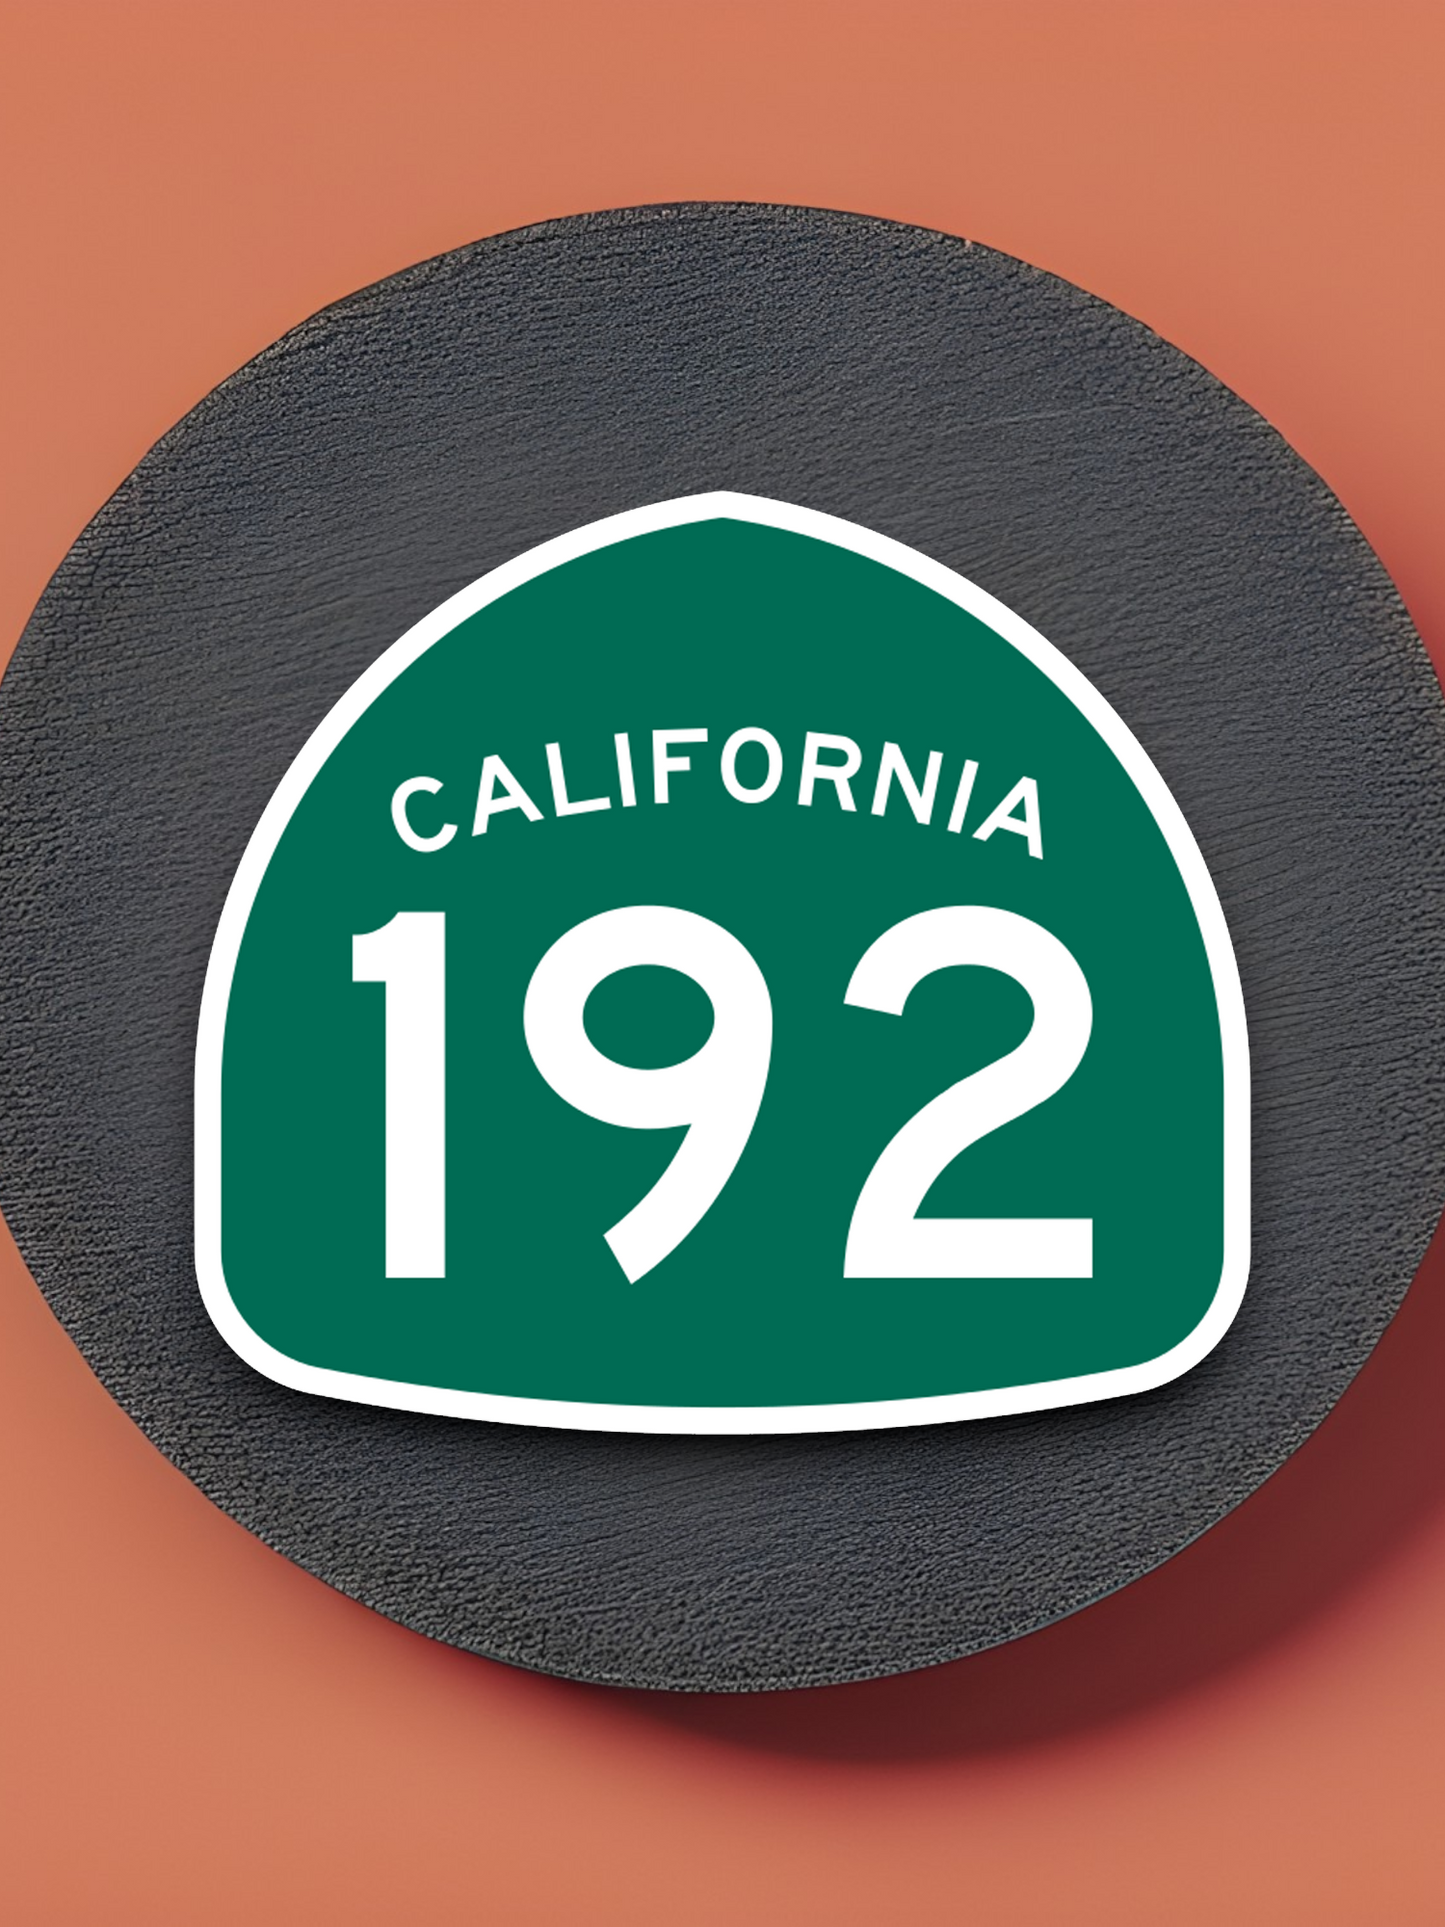 California State Route 192 Road Sign Sticker